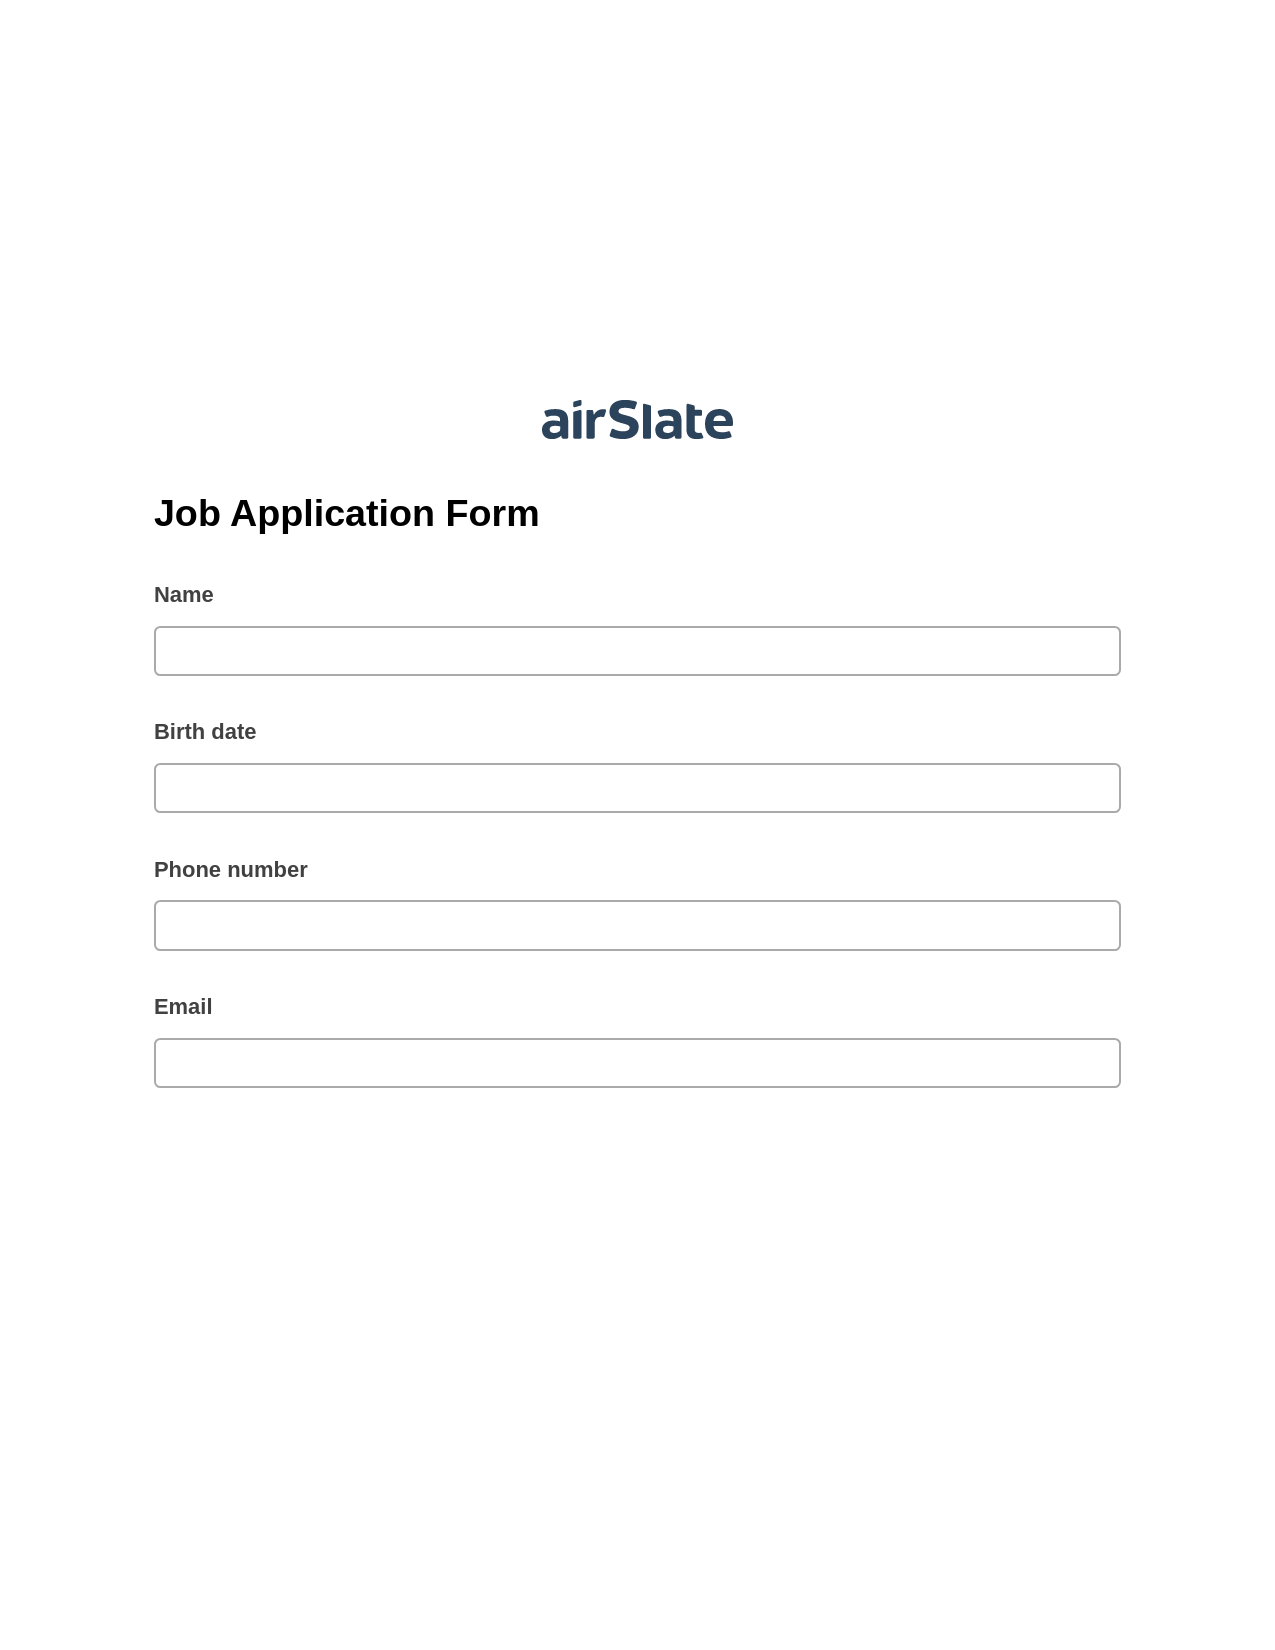 Multirole Job Application Form Pre-fill Dropdowns from Smartsheet Bot, Create NetSuite Records Bot, Export to Formstack Documents Bot